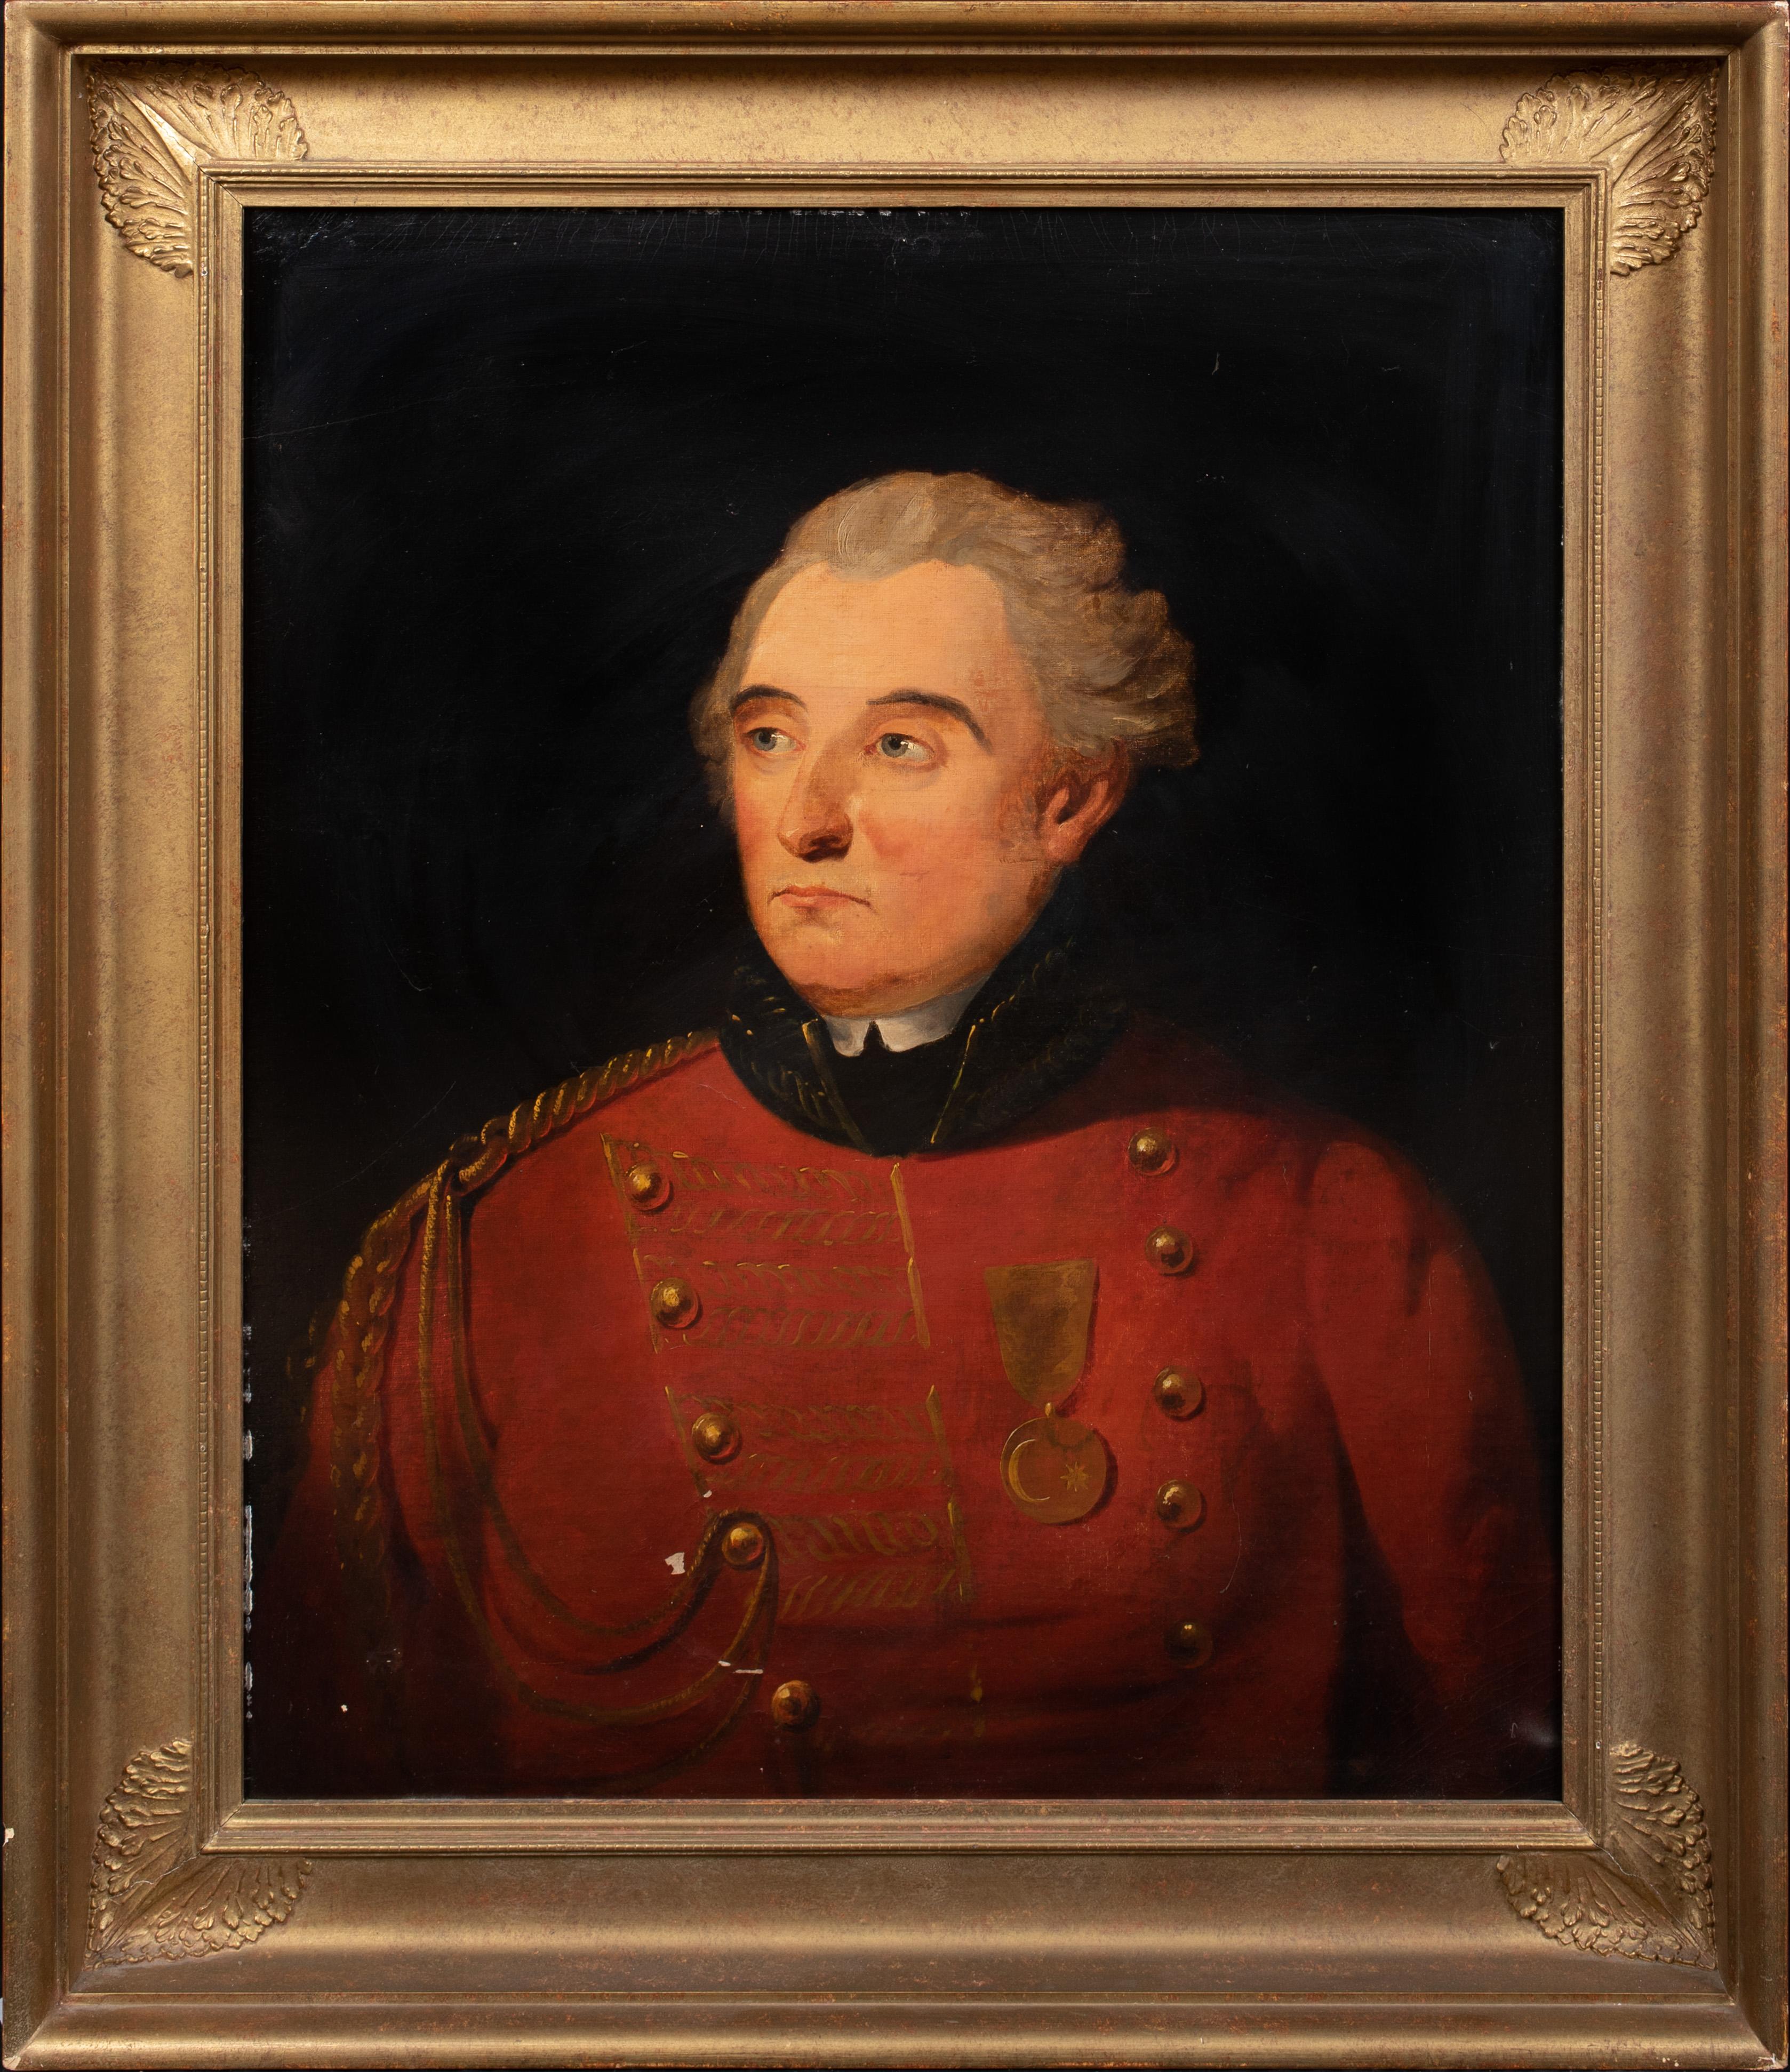 Unknown Portrait Painting - Lt. General Sir John Moore With Sultan's Medal for Egypt, 18th Century